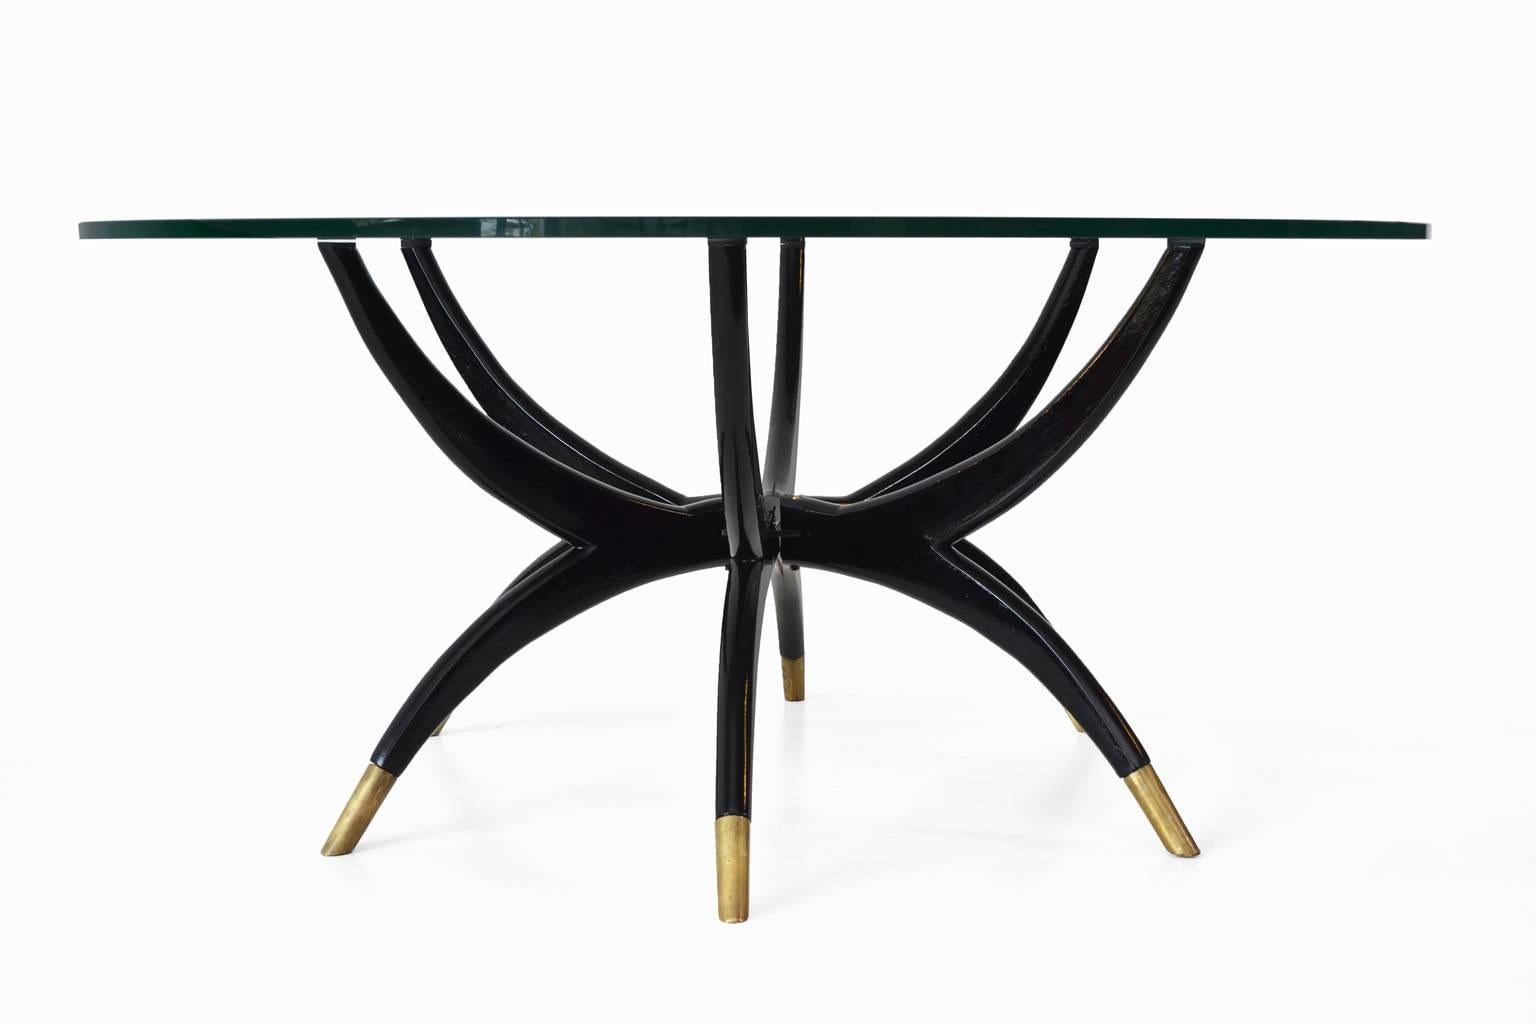 Stunning spider leg coffee table, 1950s. Beautiful organic and elegant form. High gloss black wooden base with graceful brass sockets, on top a 12 mm thick glass plate. Nice decorative and luxurious Mid-Century Modern piece. All in excellent